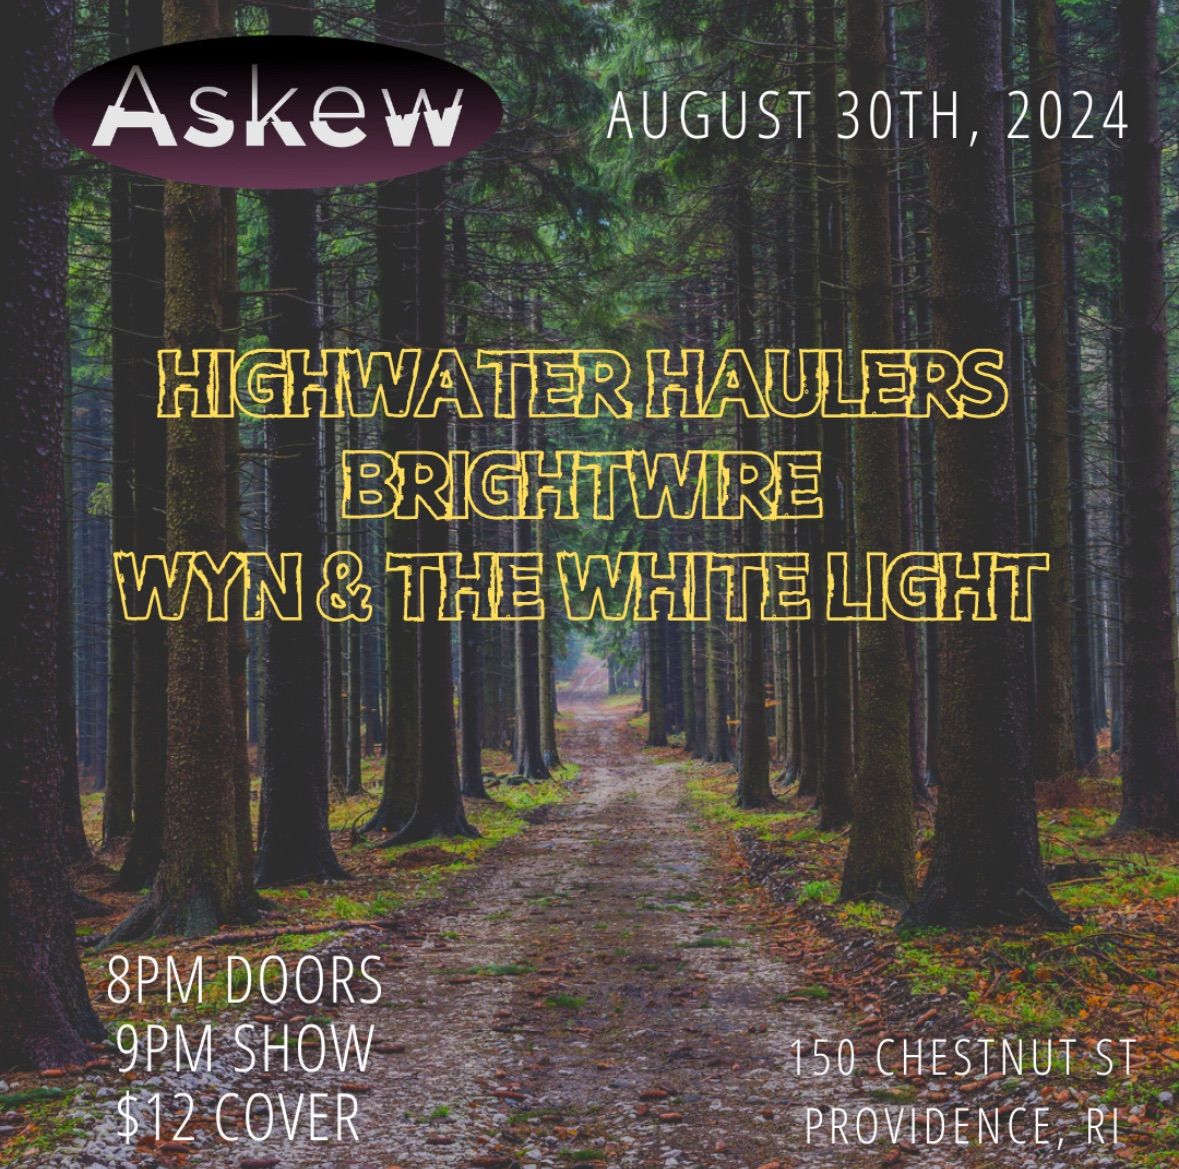 Highwater Haulers, Brightwire (TX), Wyn & The White Light at Askew